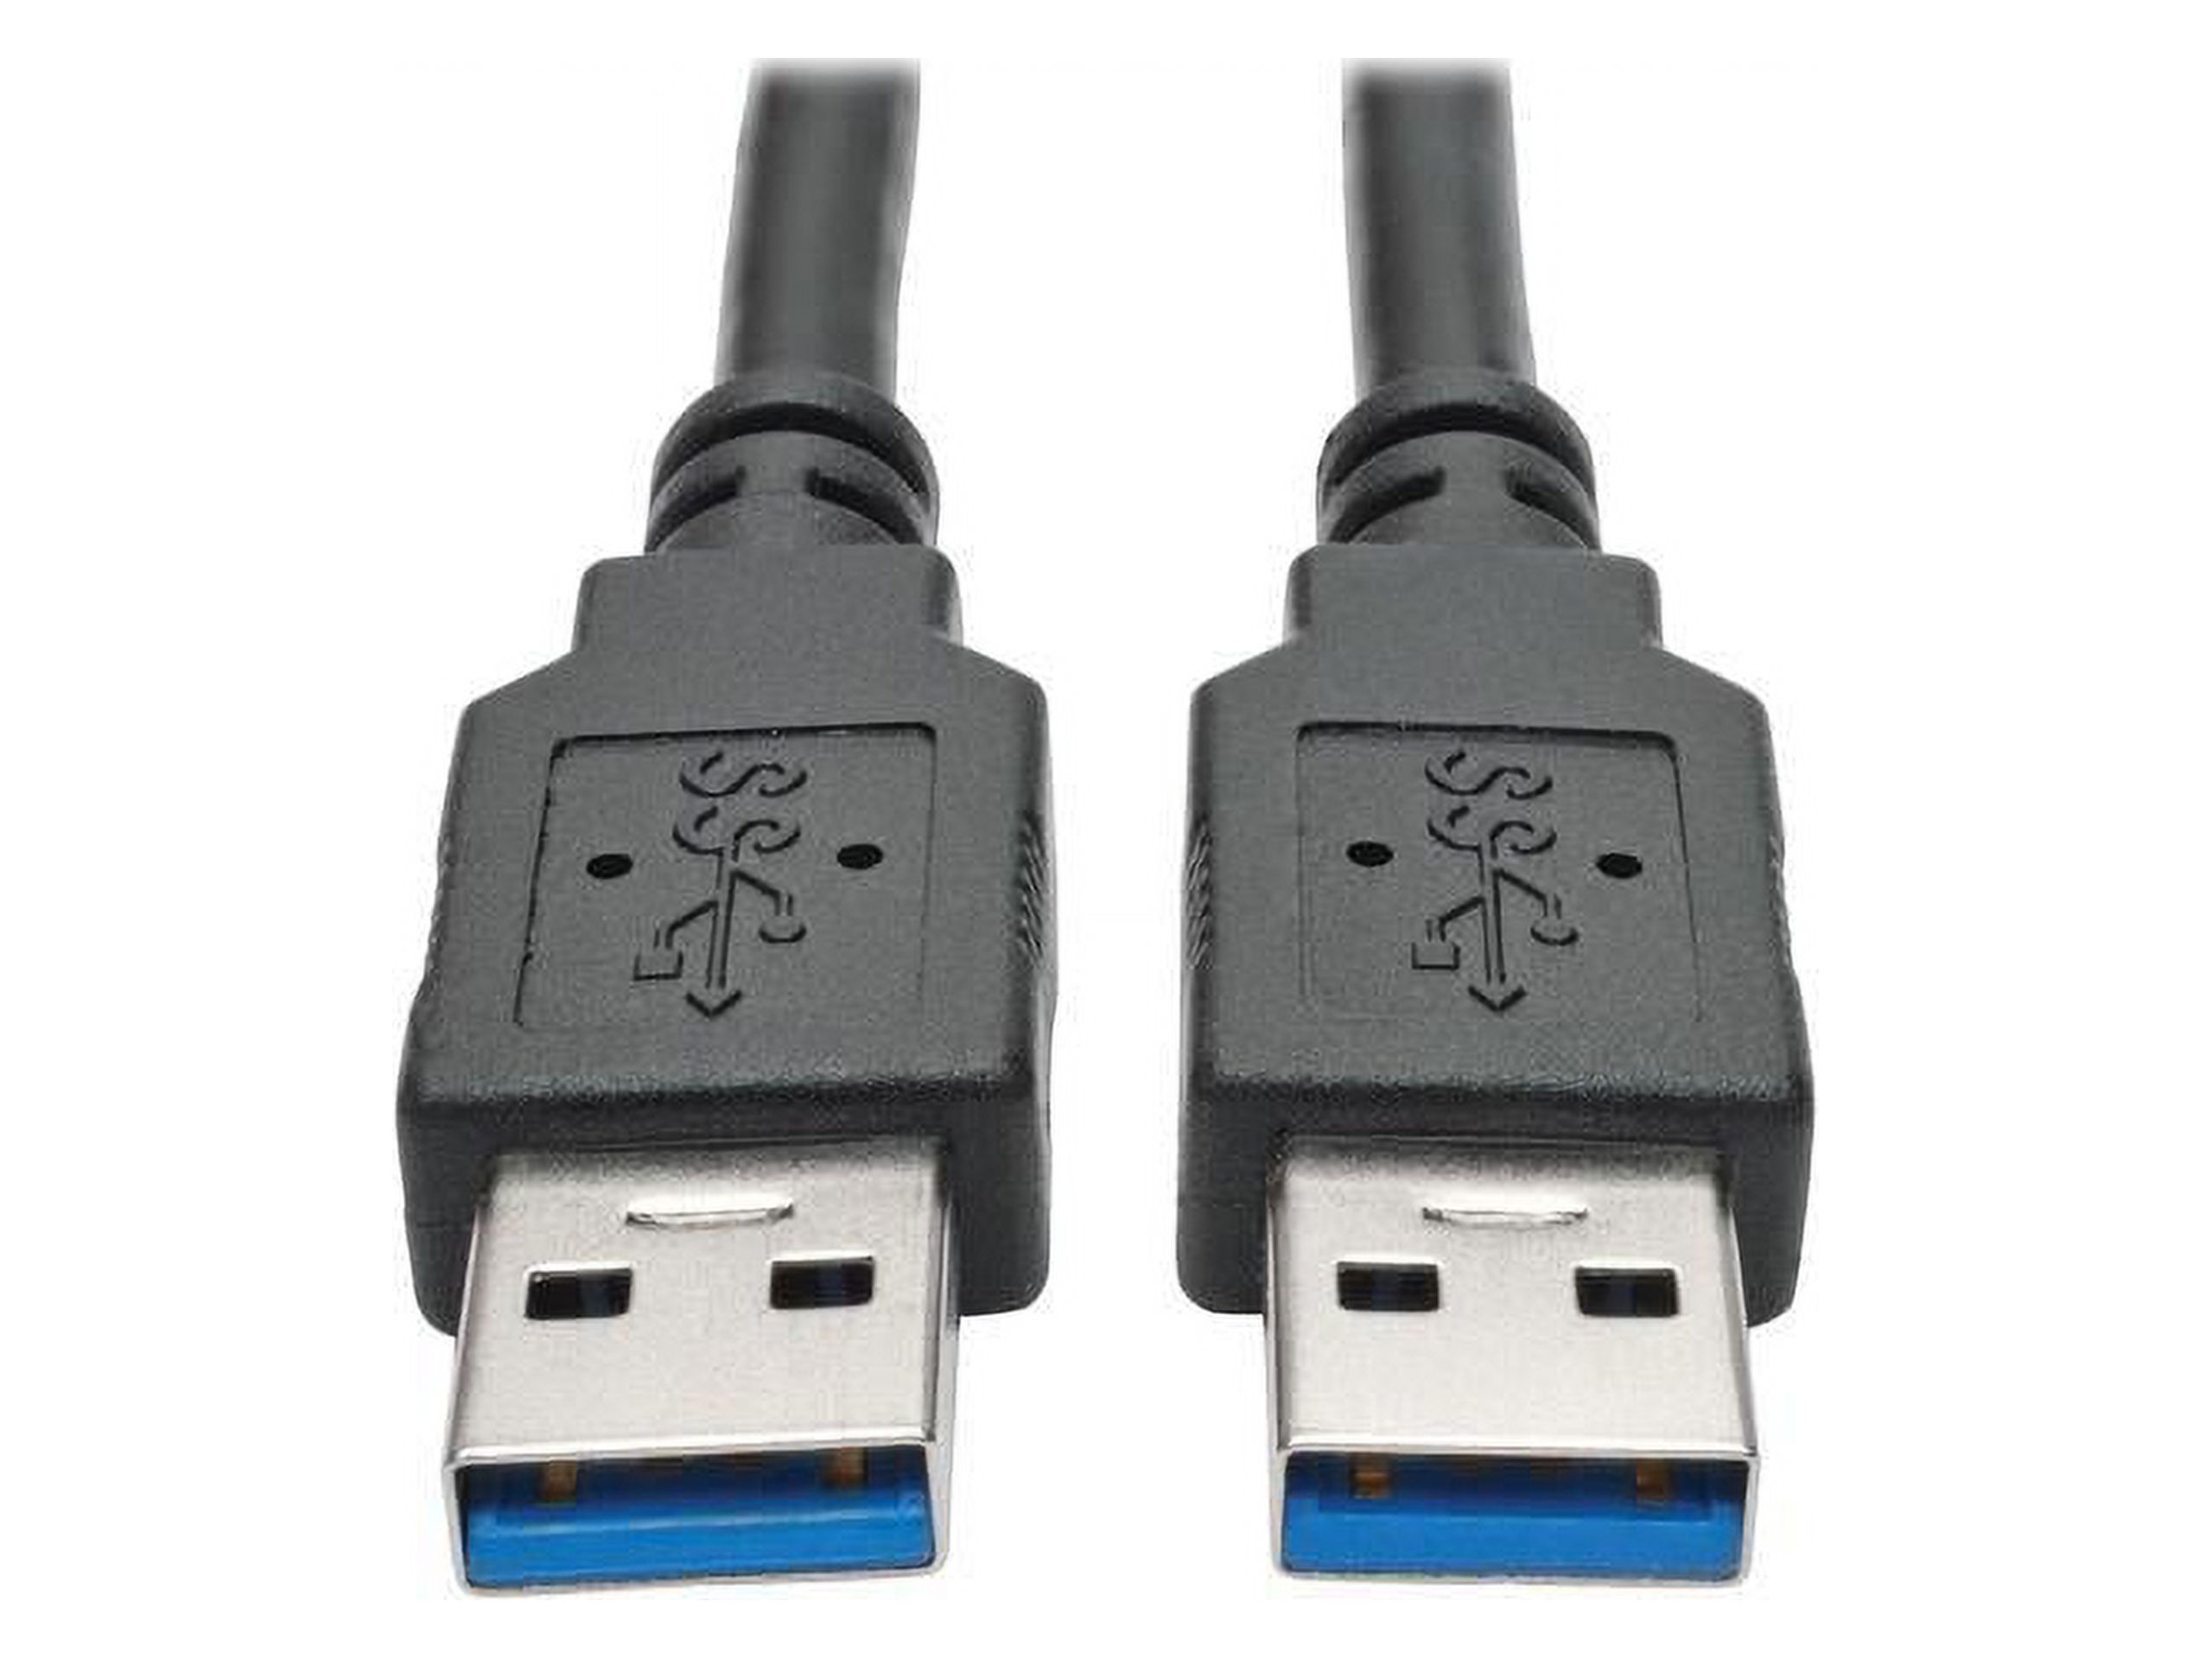 Tripp Lite 6 ft. USB 3.0 SuperSpeed A/A Cable (M/M), 28/24 AWG, 5 Gbps, Black, 6' (U320-006-BK) - image 1 of 3